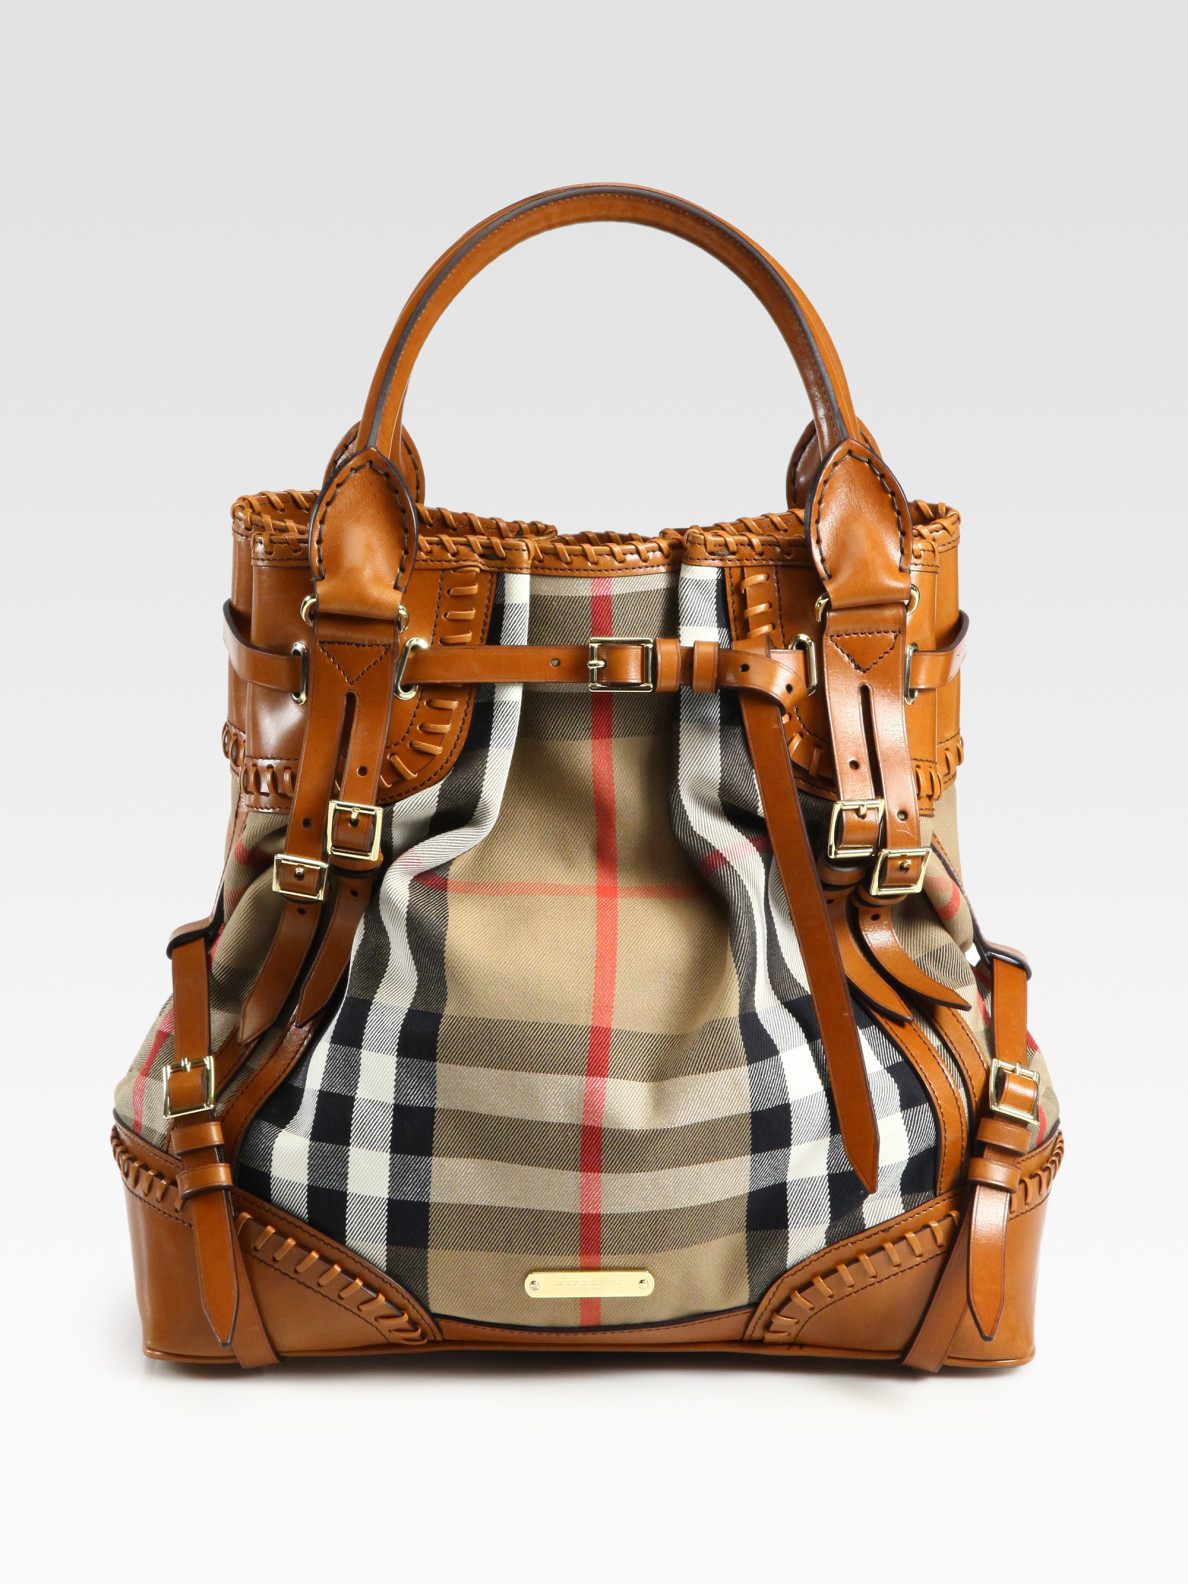 Burberry prorsum Whipstitch Leather & Check Canvas Tote Bag in Brown | Lyst